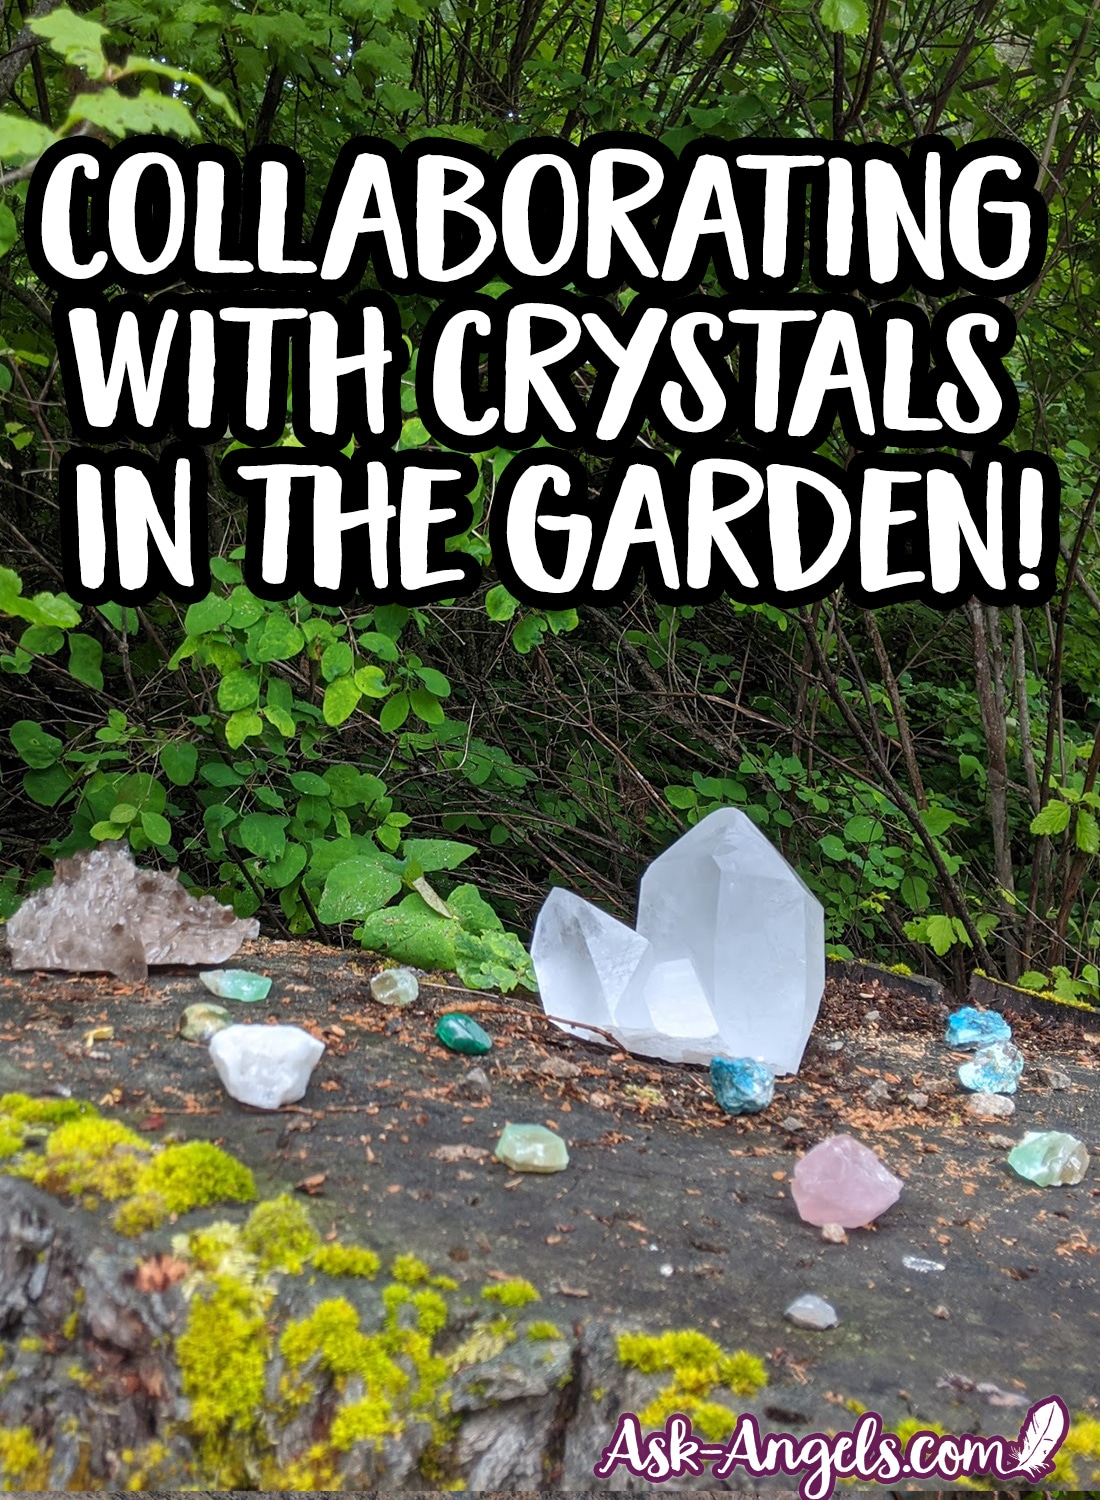 Collaborating with Crystals in the Garden